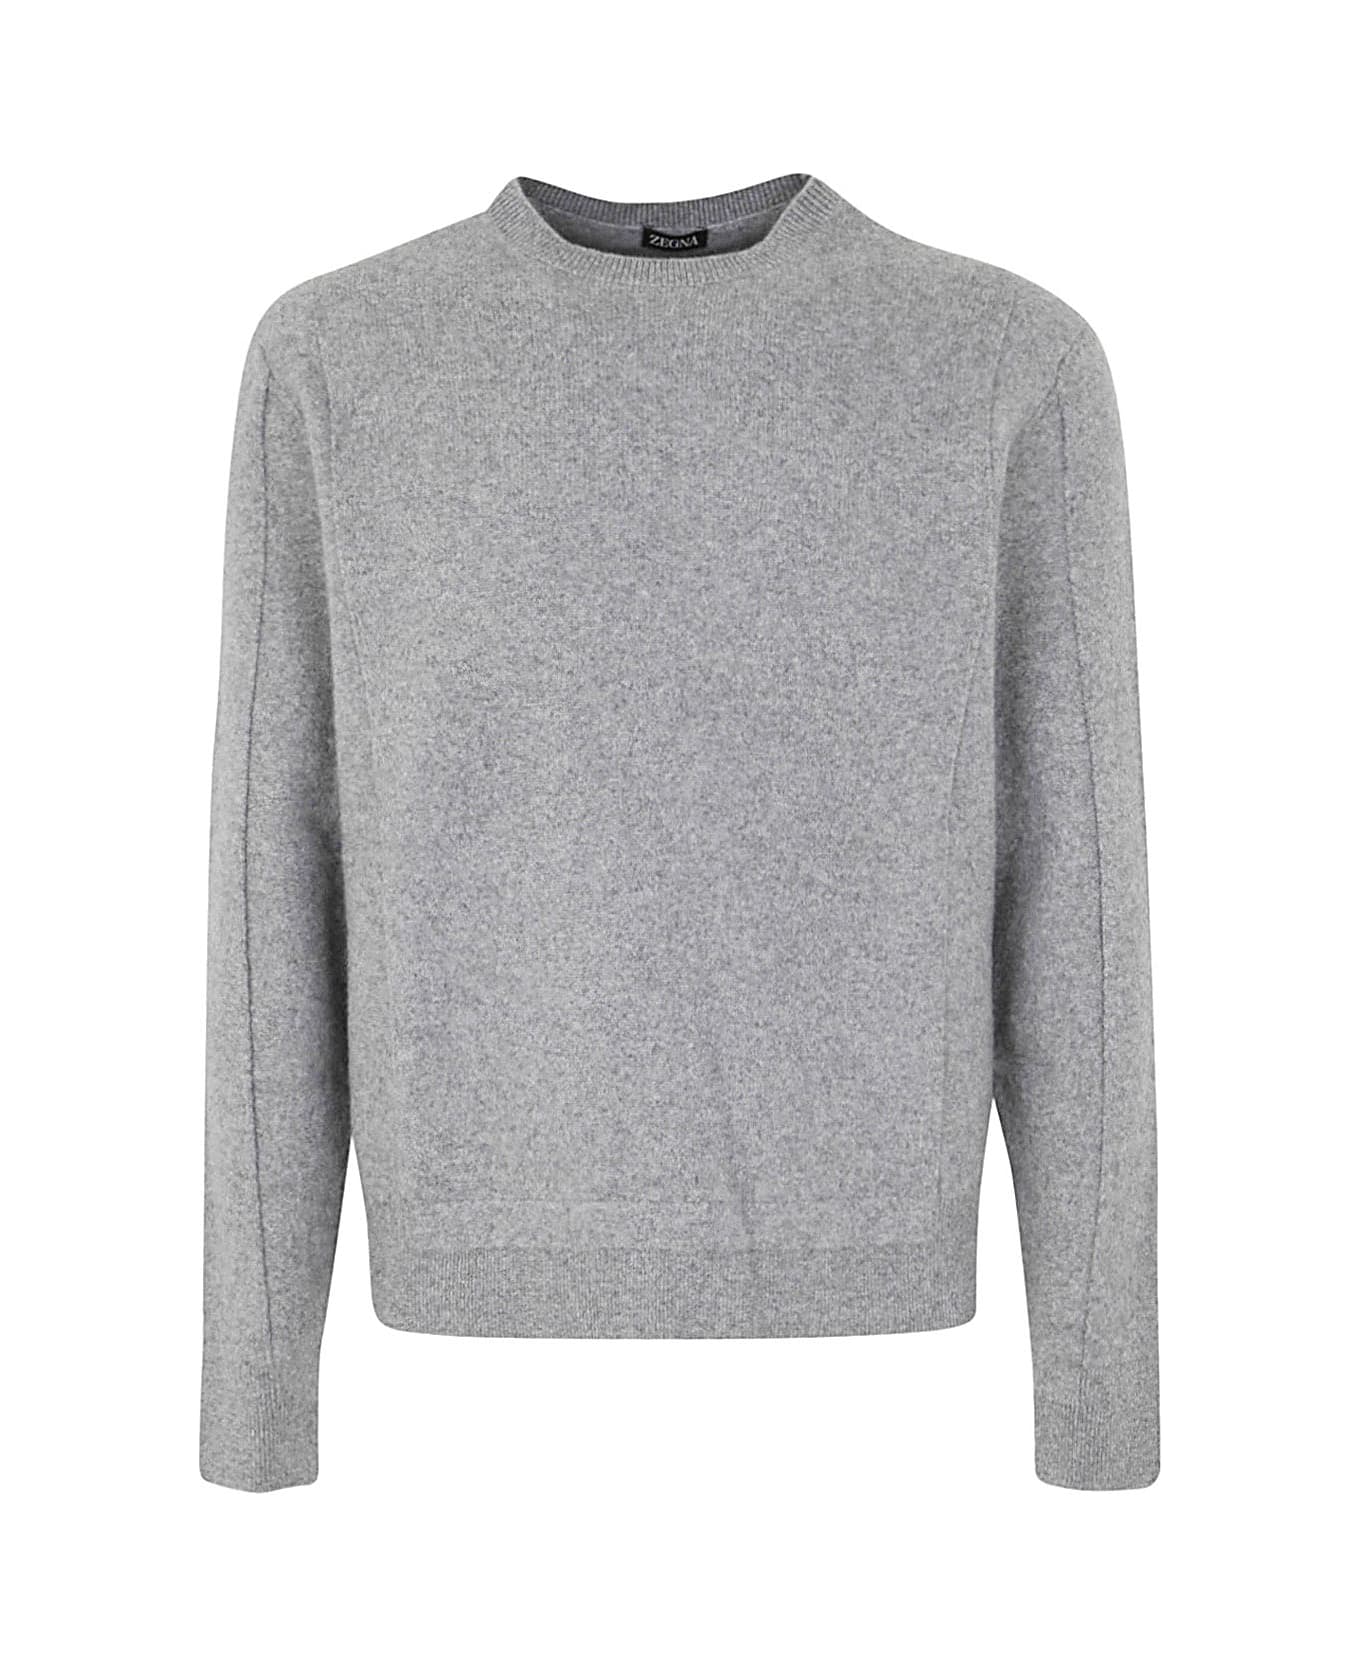 Zegna Wool And Cashmere Crew Neck Sweater - Grey フリース